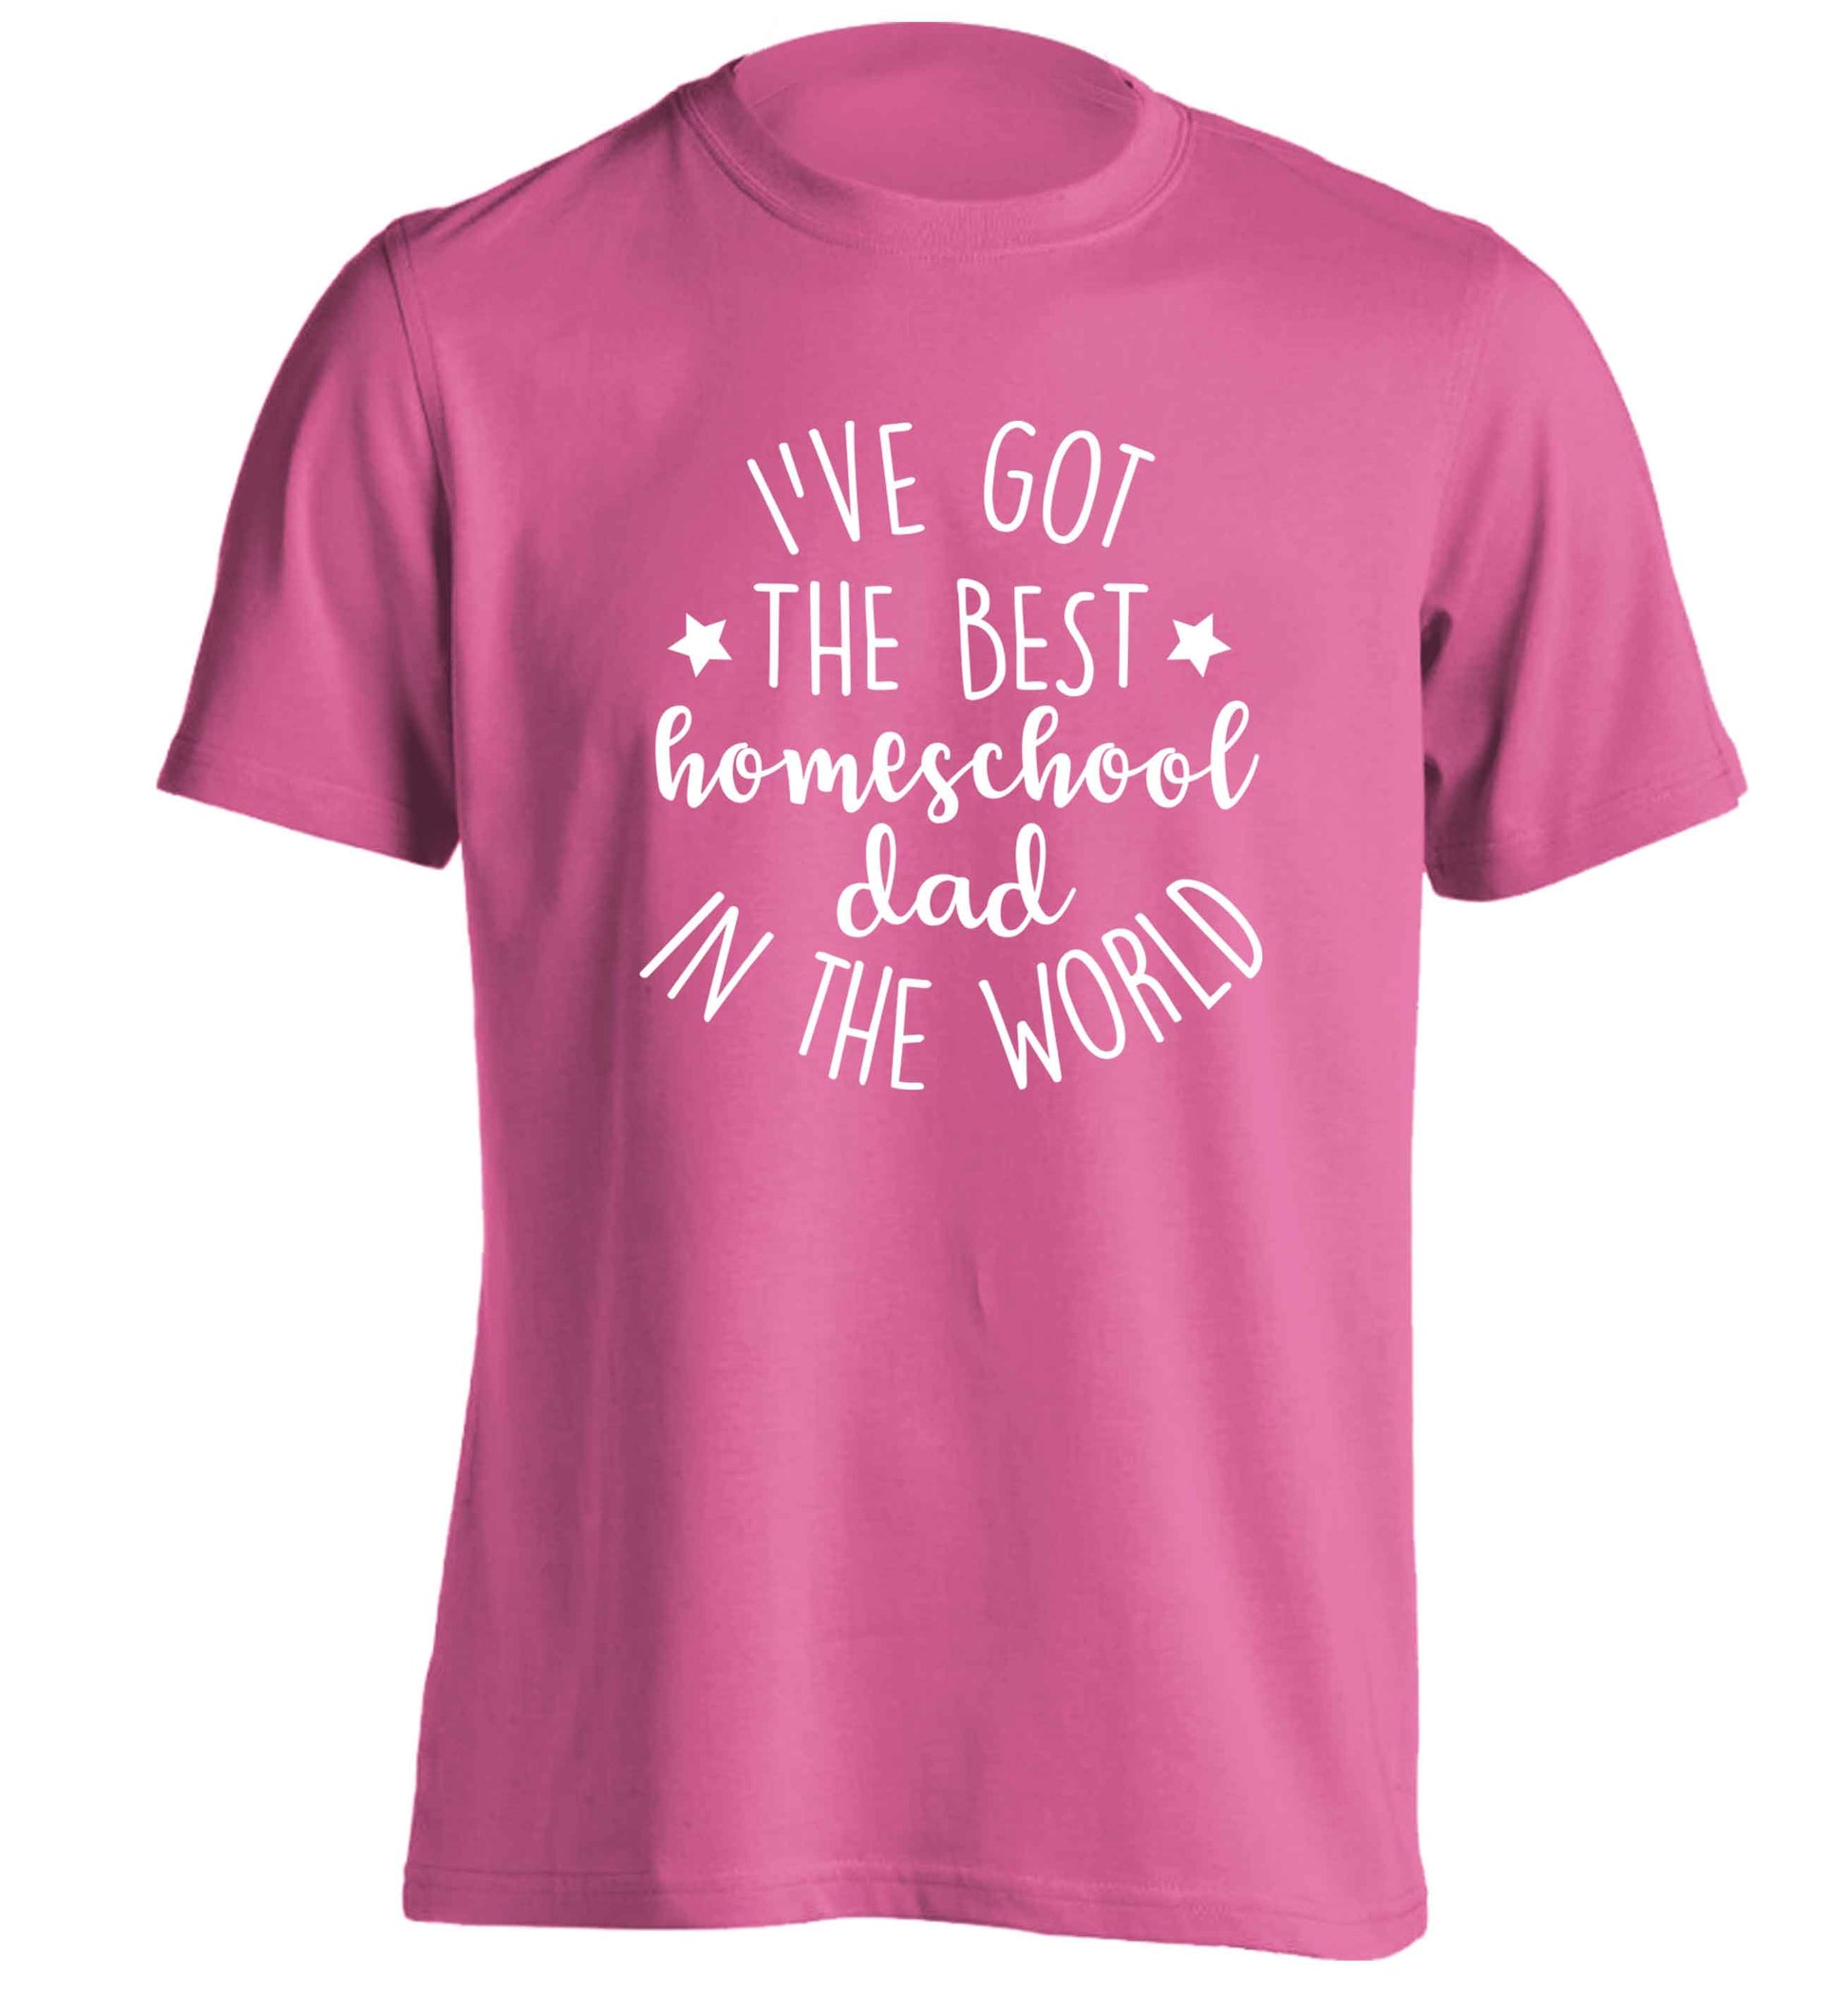 I've got the best homeschool dad in the world adults unisex pink Tshirt 2XL